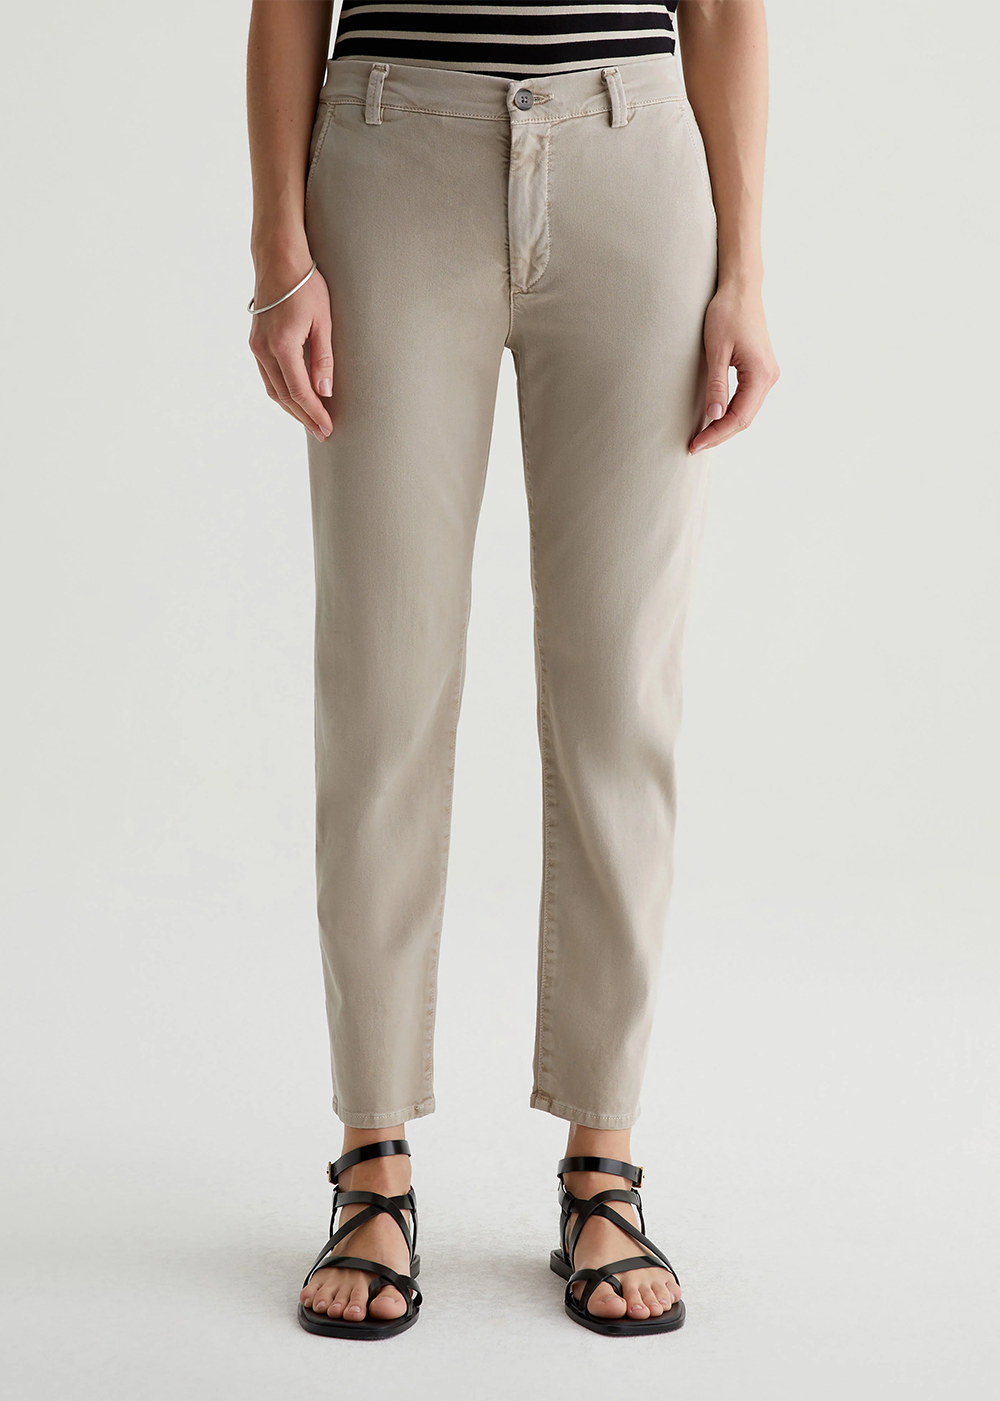 Caden Tailored Trousers - Sulfur Flax - AG Jeans Canada - Danali - SBW1613SLFLAX